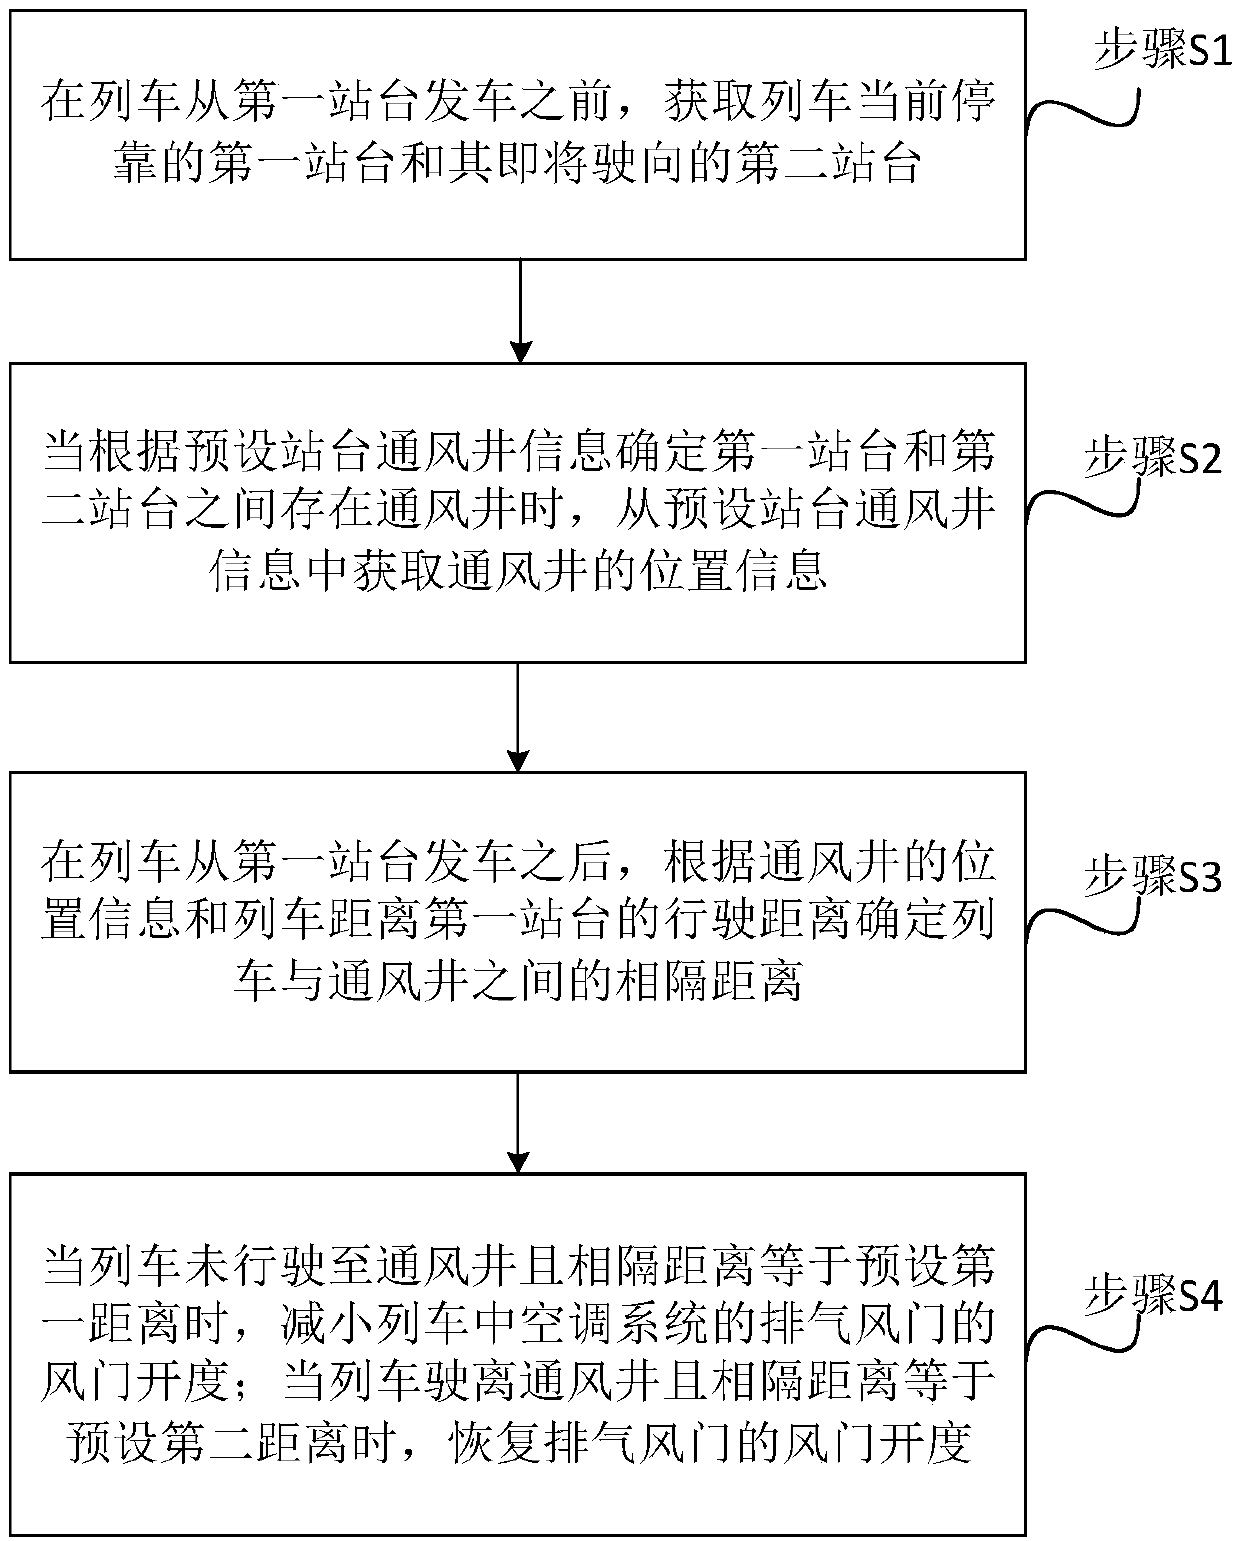 Control method and system for preventing pressure jump of train passenger compartment in long tunnel